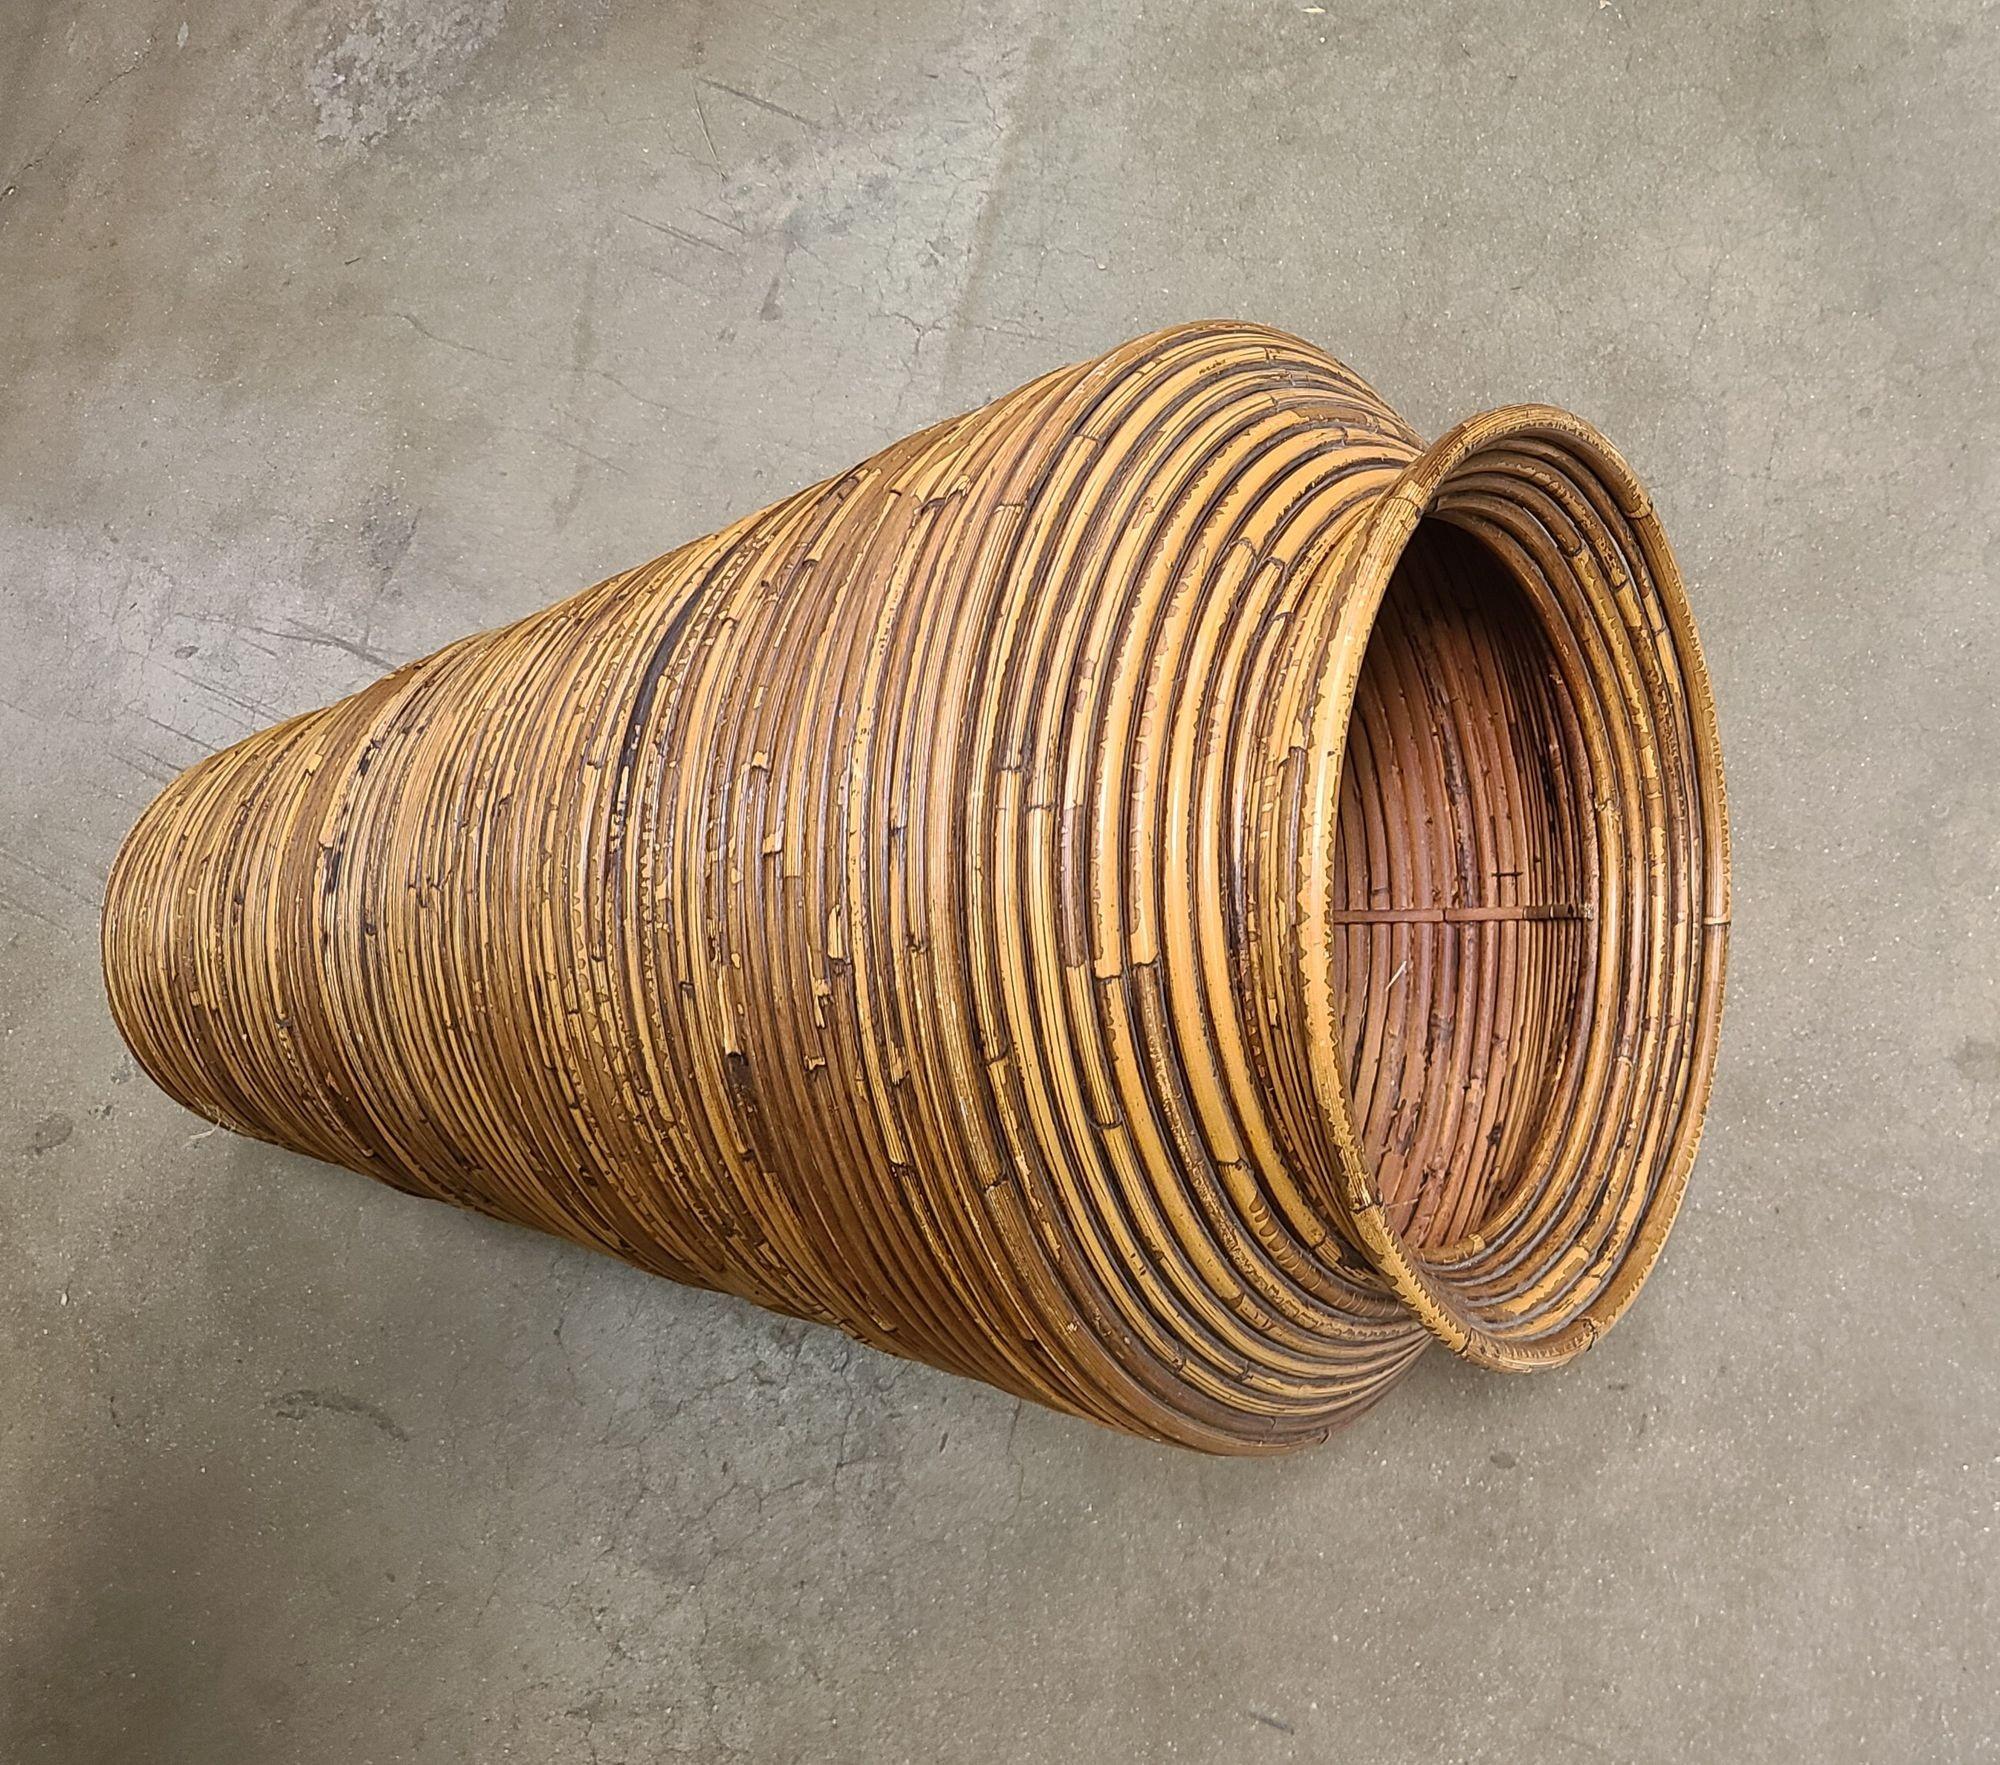 Large 2' tapered floor rattan vase made from stacked reed pencil rattan rings. Perfect for holding dried arrangements or simply standing on its own.
Measurements are approximately 27